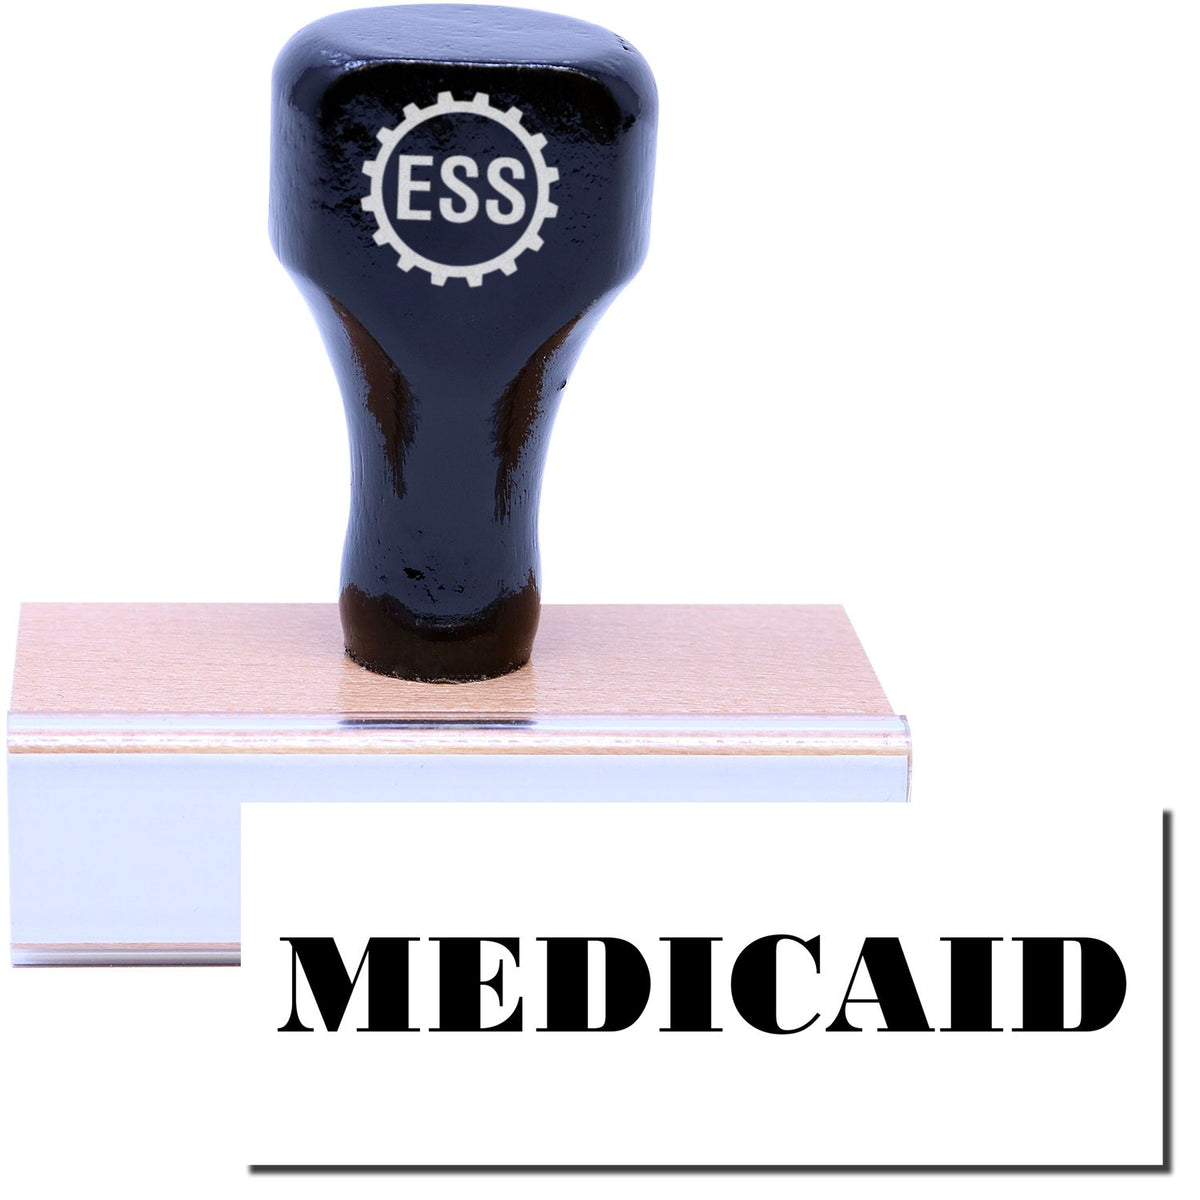 A stock office rubber stamp with a stamped image showing how the text &quot;MEDICAID&quot; is displayed after stamping.